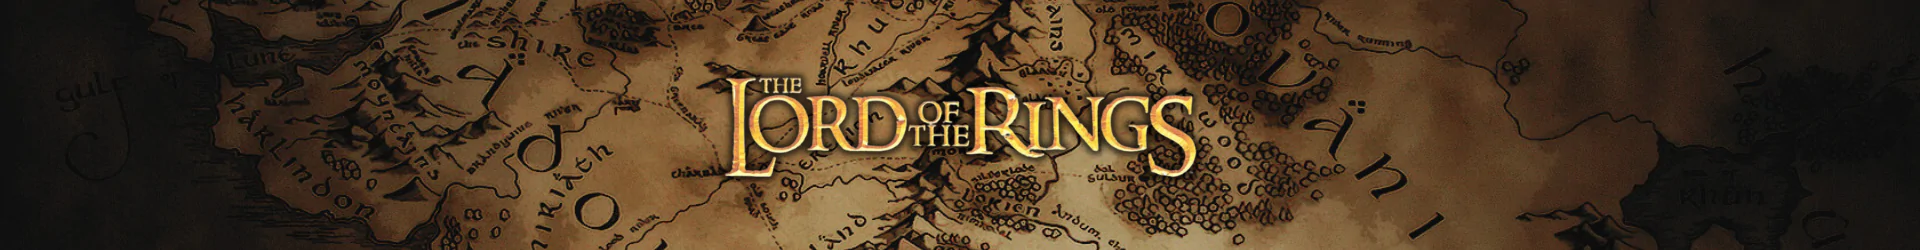 Lord of the Rings products banner